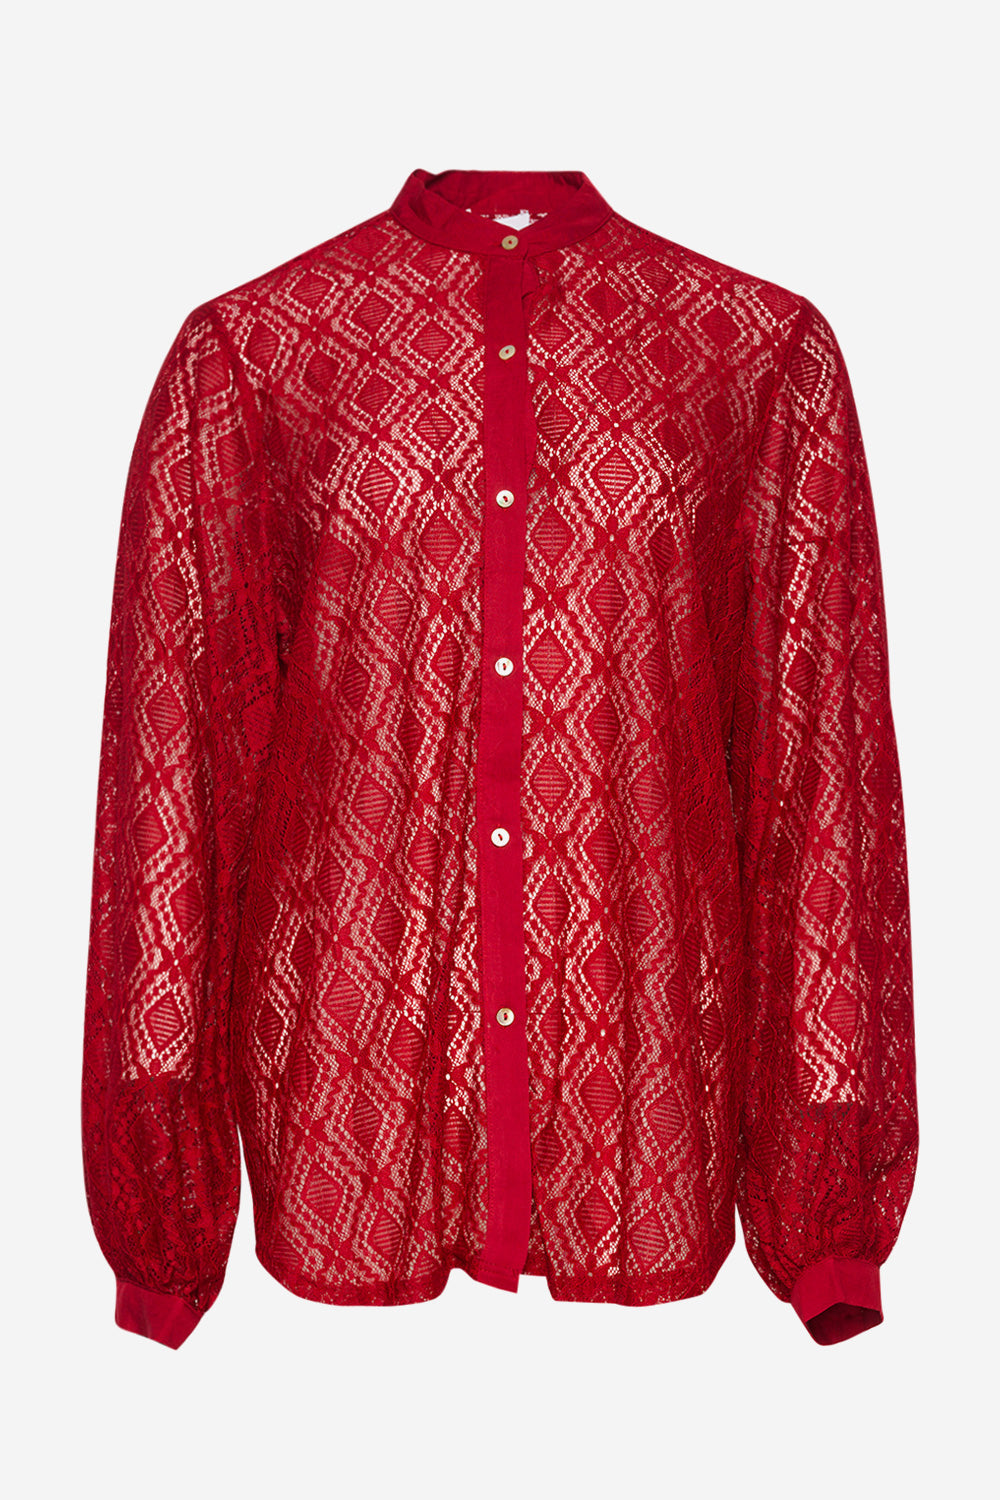 Texas Lace Shirt Red